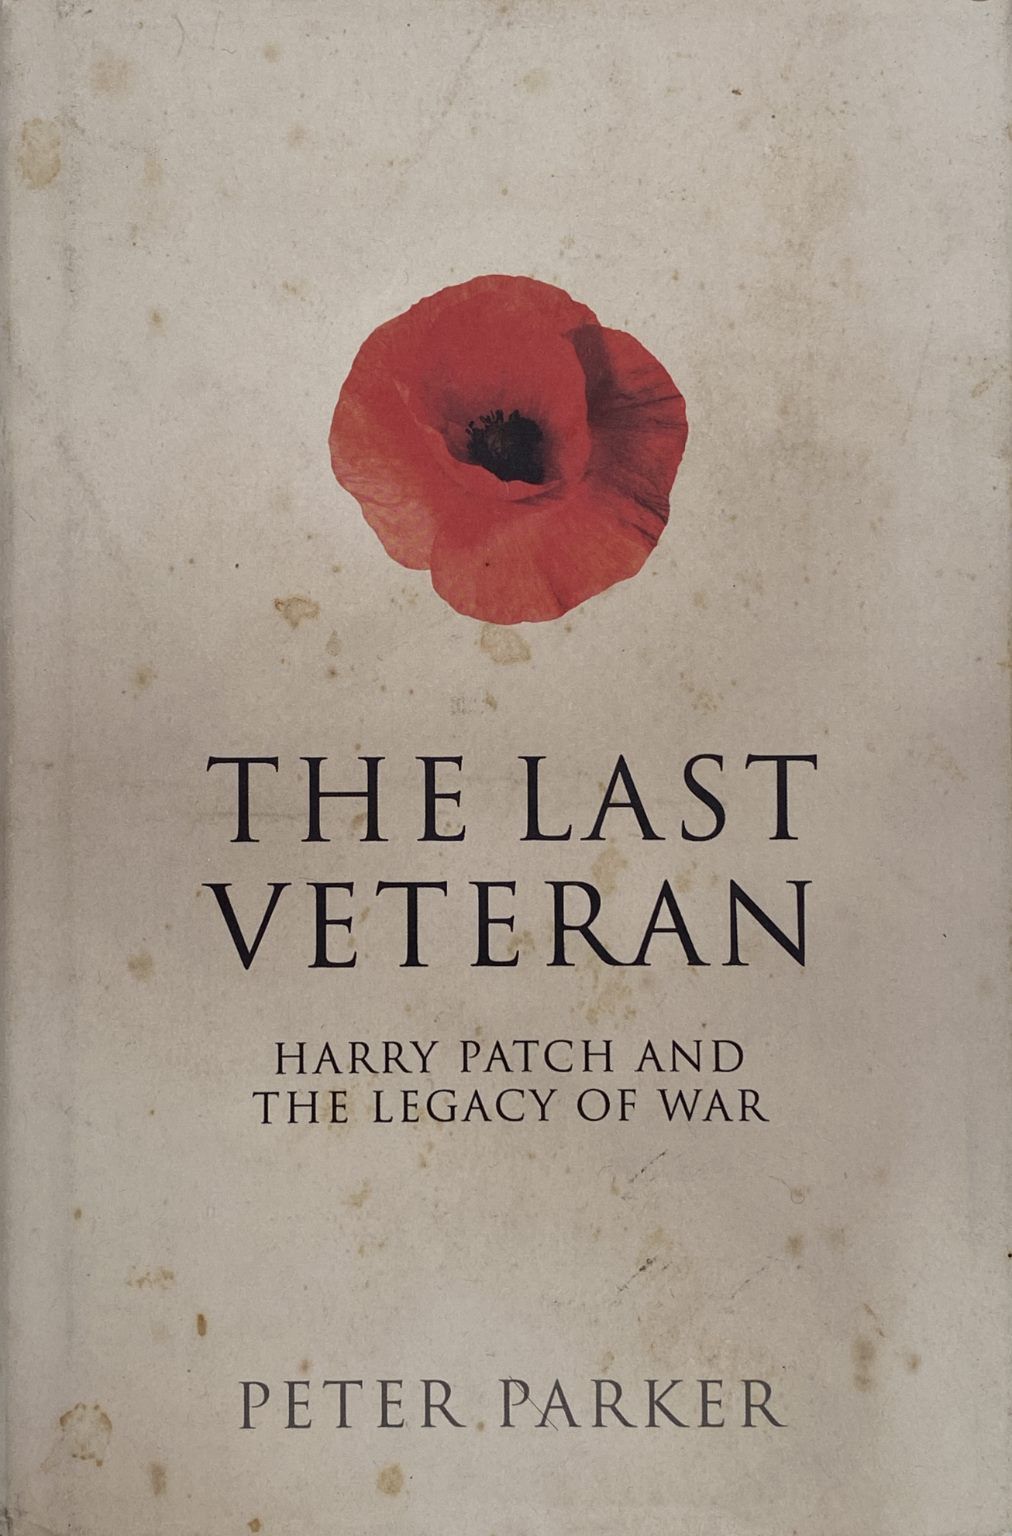 THE LAST VETERAN: Harry Patch and the Legacy of War